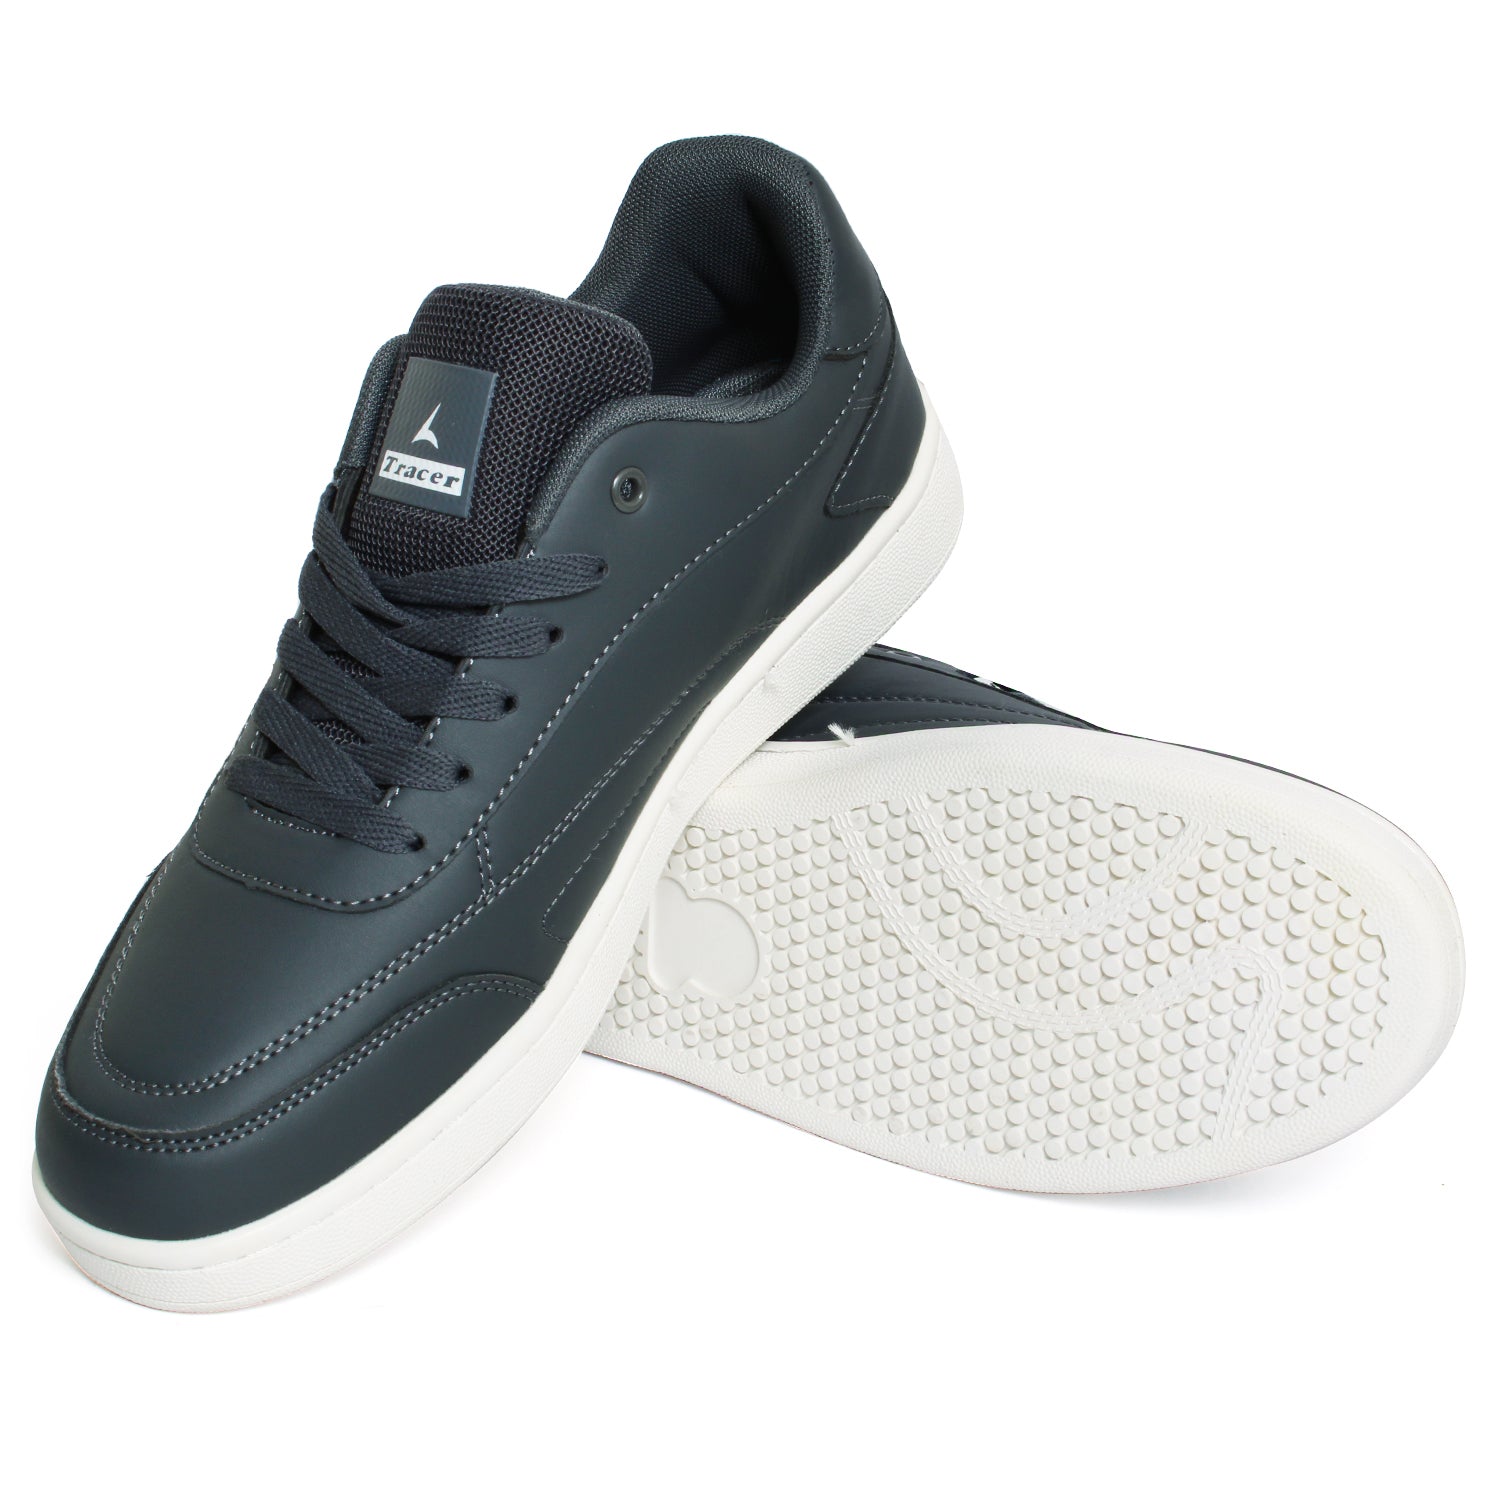 Sneakers VEJA Recife women |Sneakers with straps | VEJA US